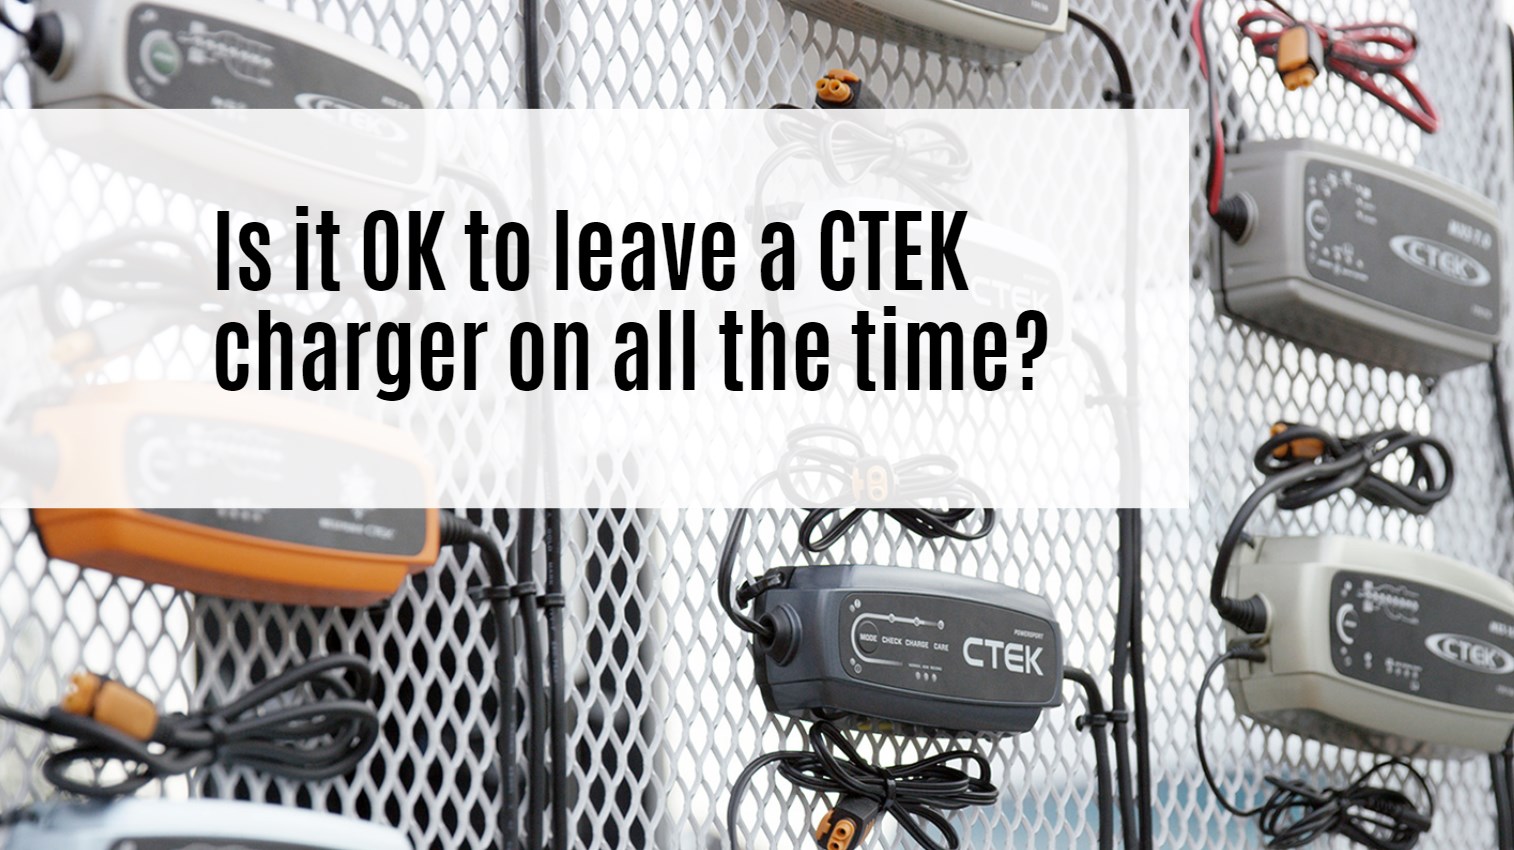 Is it OK to leave a CTEK charger on all the time?